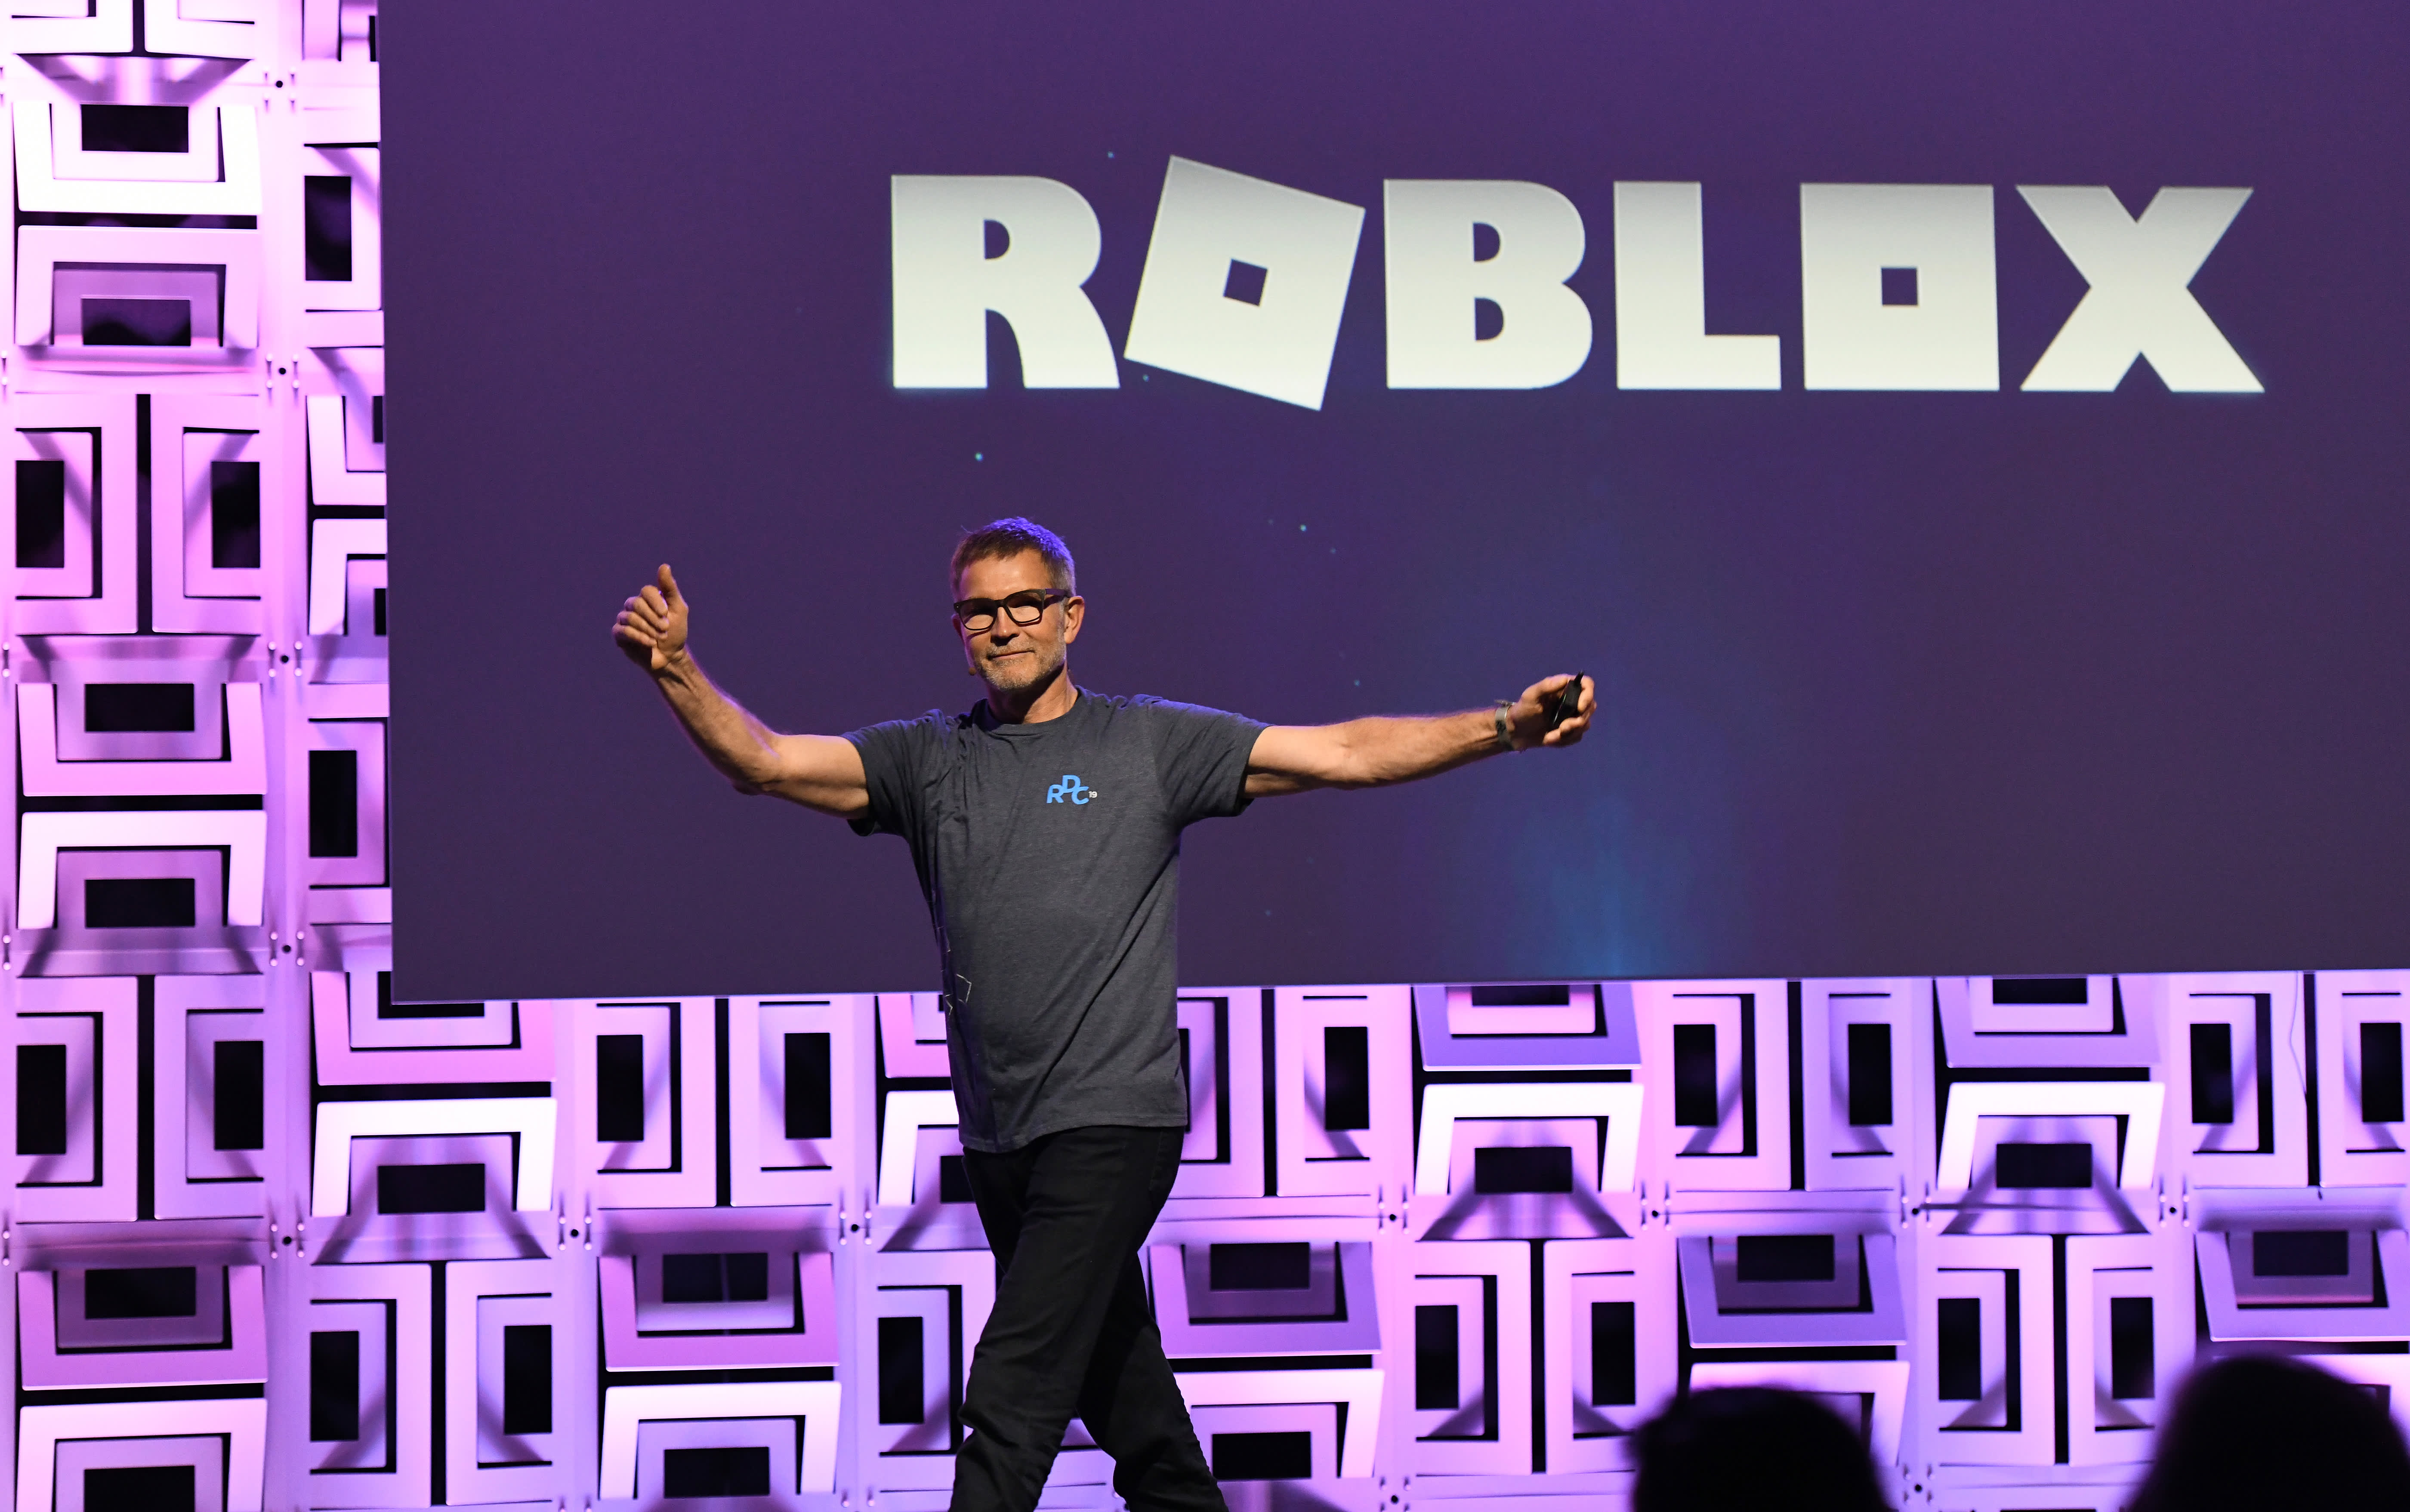 Executive Director Roblox is worth $ 4.6 billion and the Index package is worth $ 3.7 billion